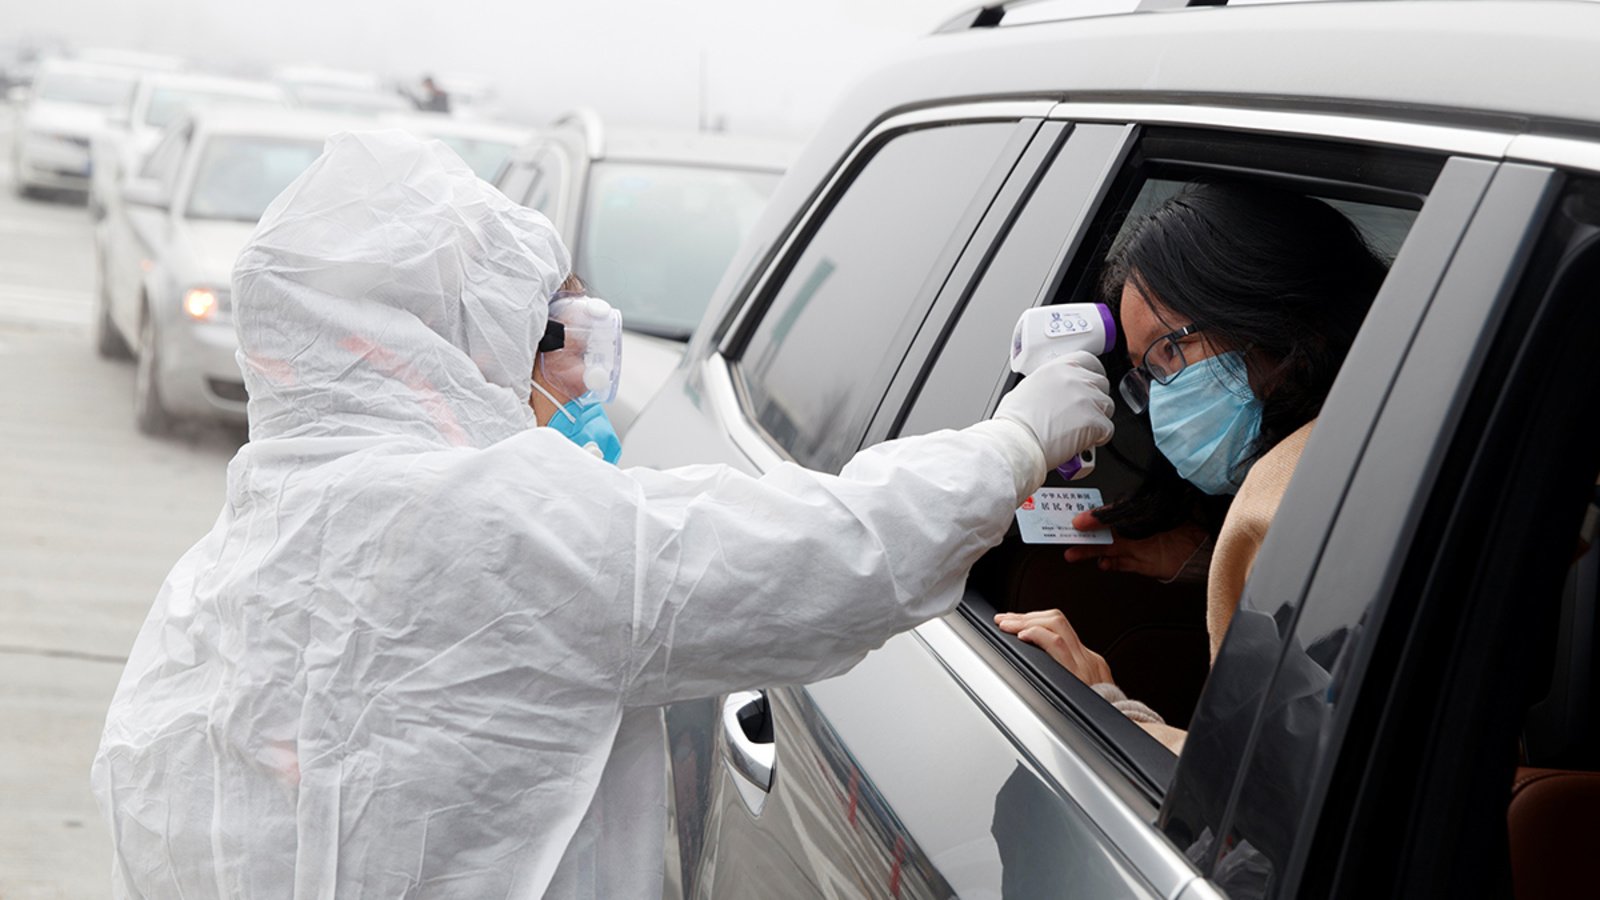 A medical worker checks a person’s temperature in China amid the coronavirus outbreak in January 2020.